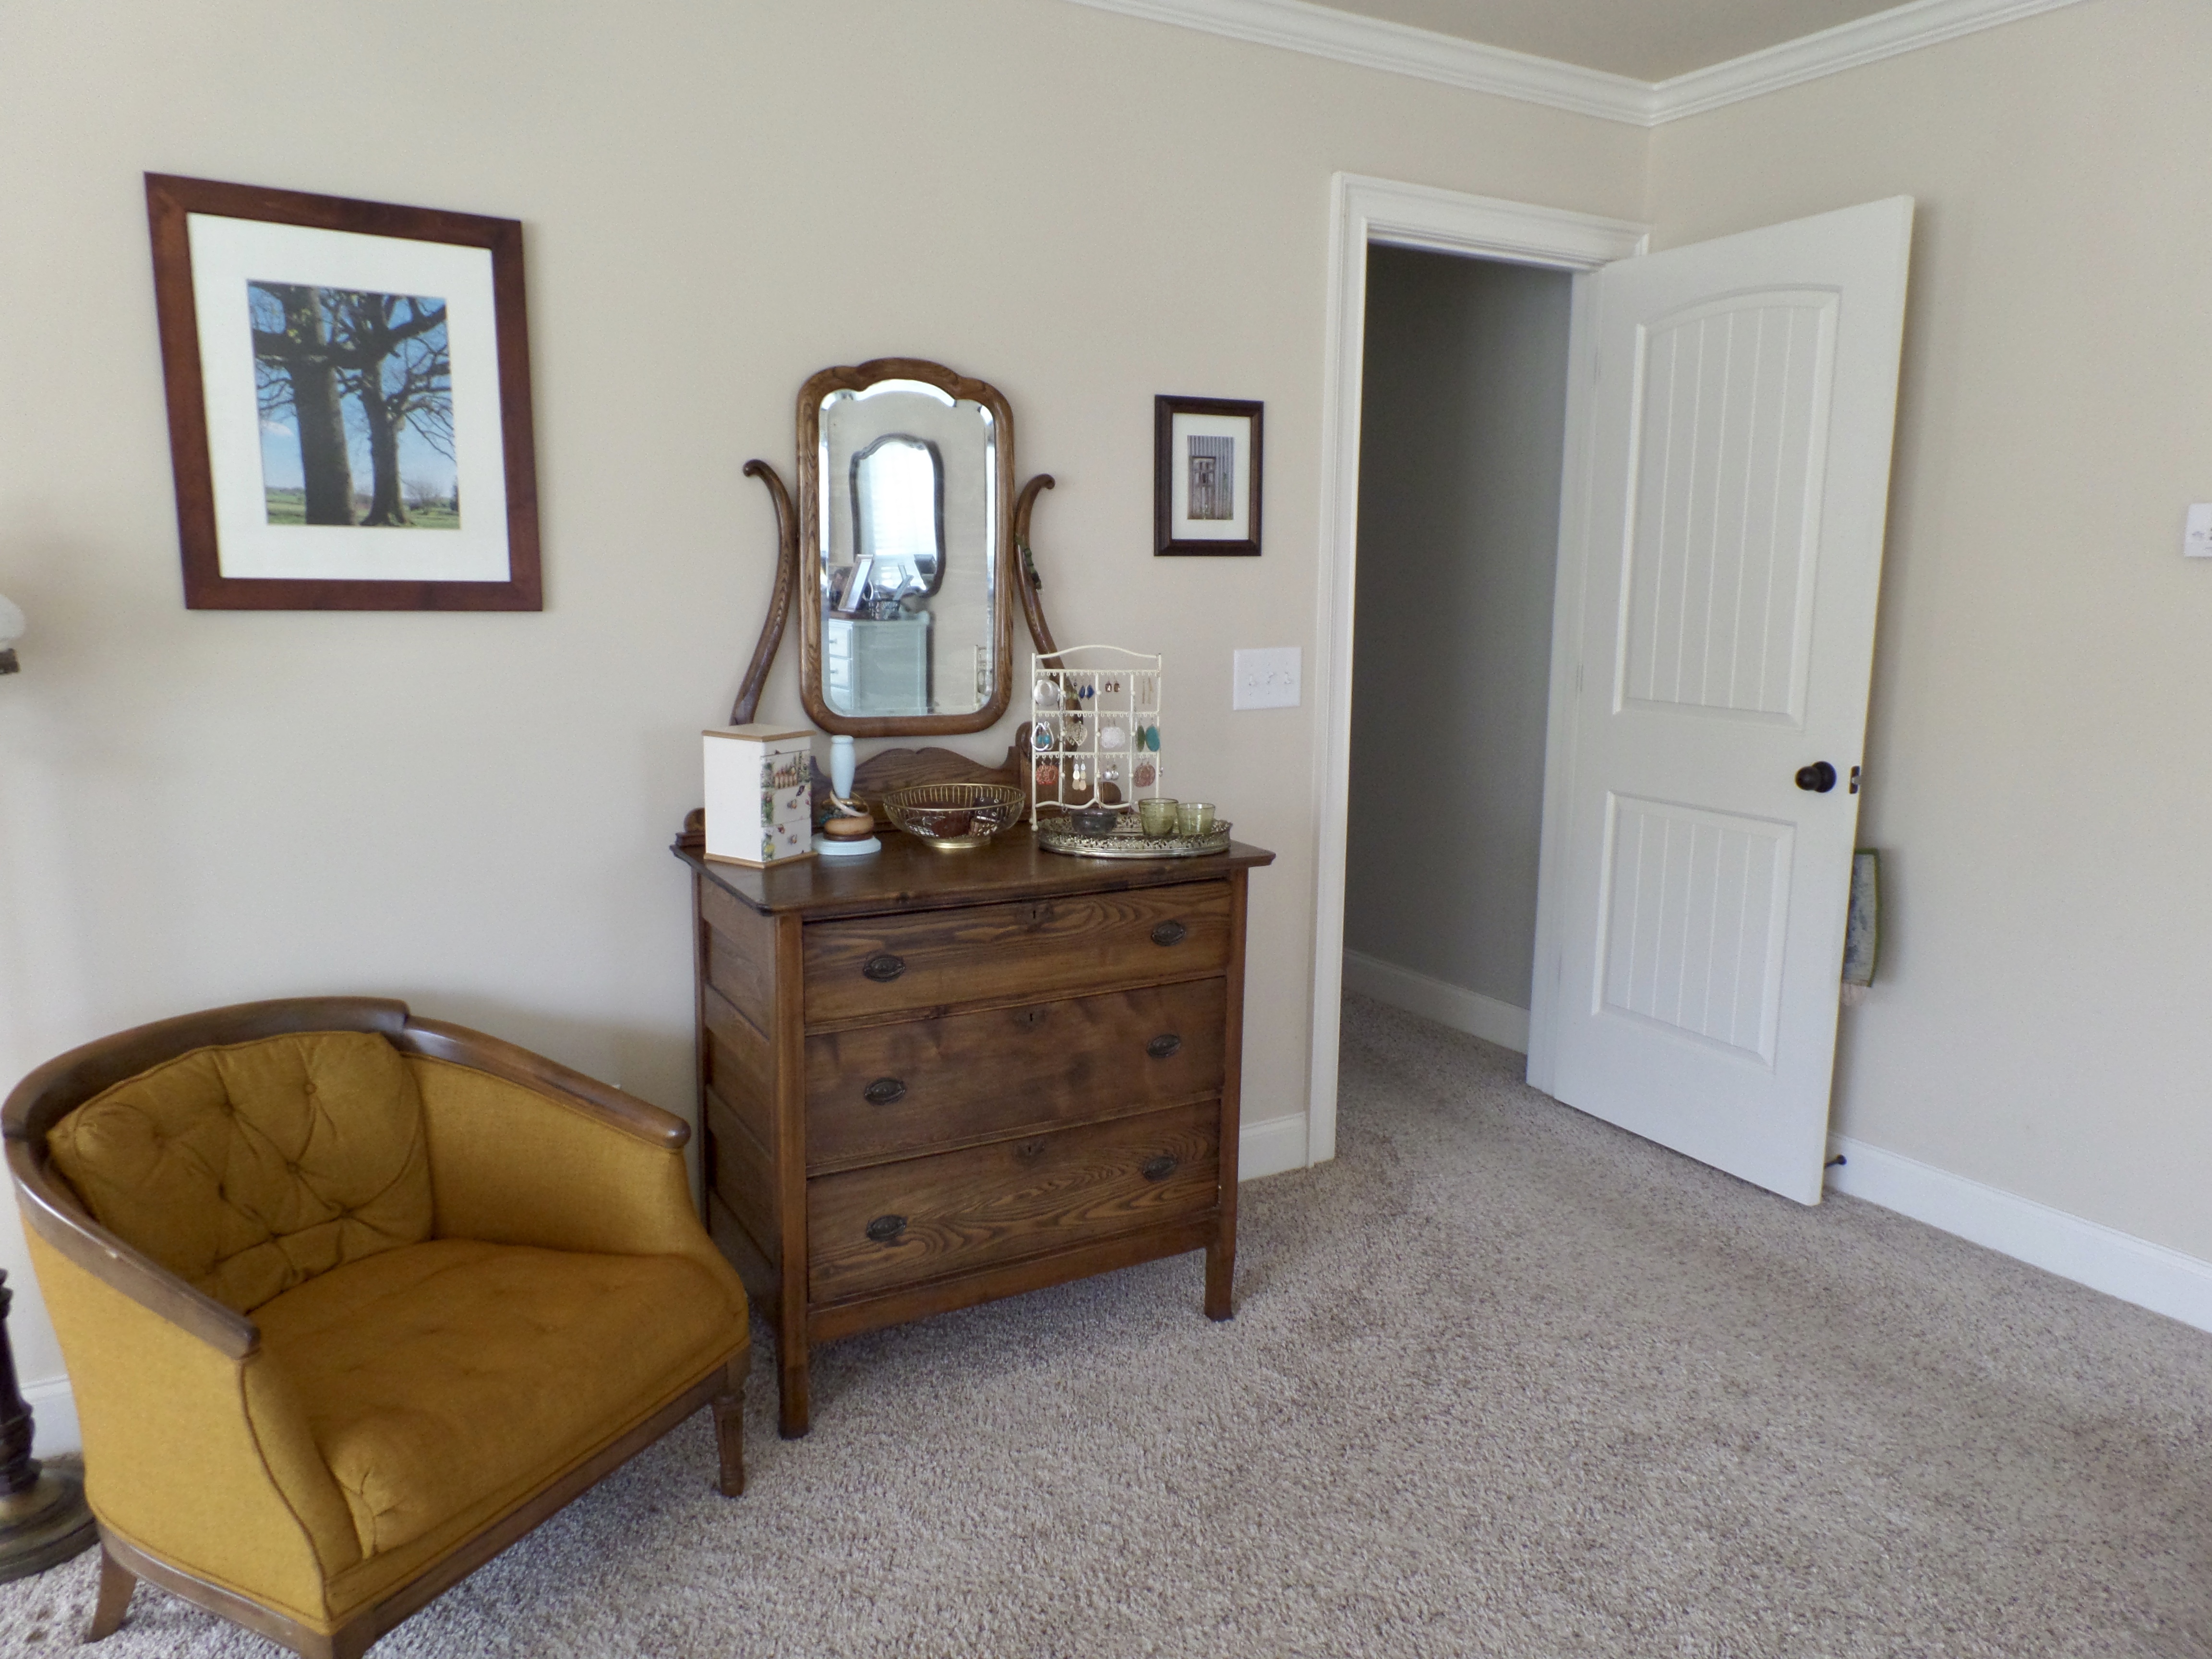 An antique chest of drawers with an attached mirror next to the door of a master bedroom.